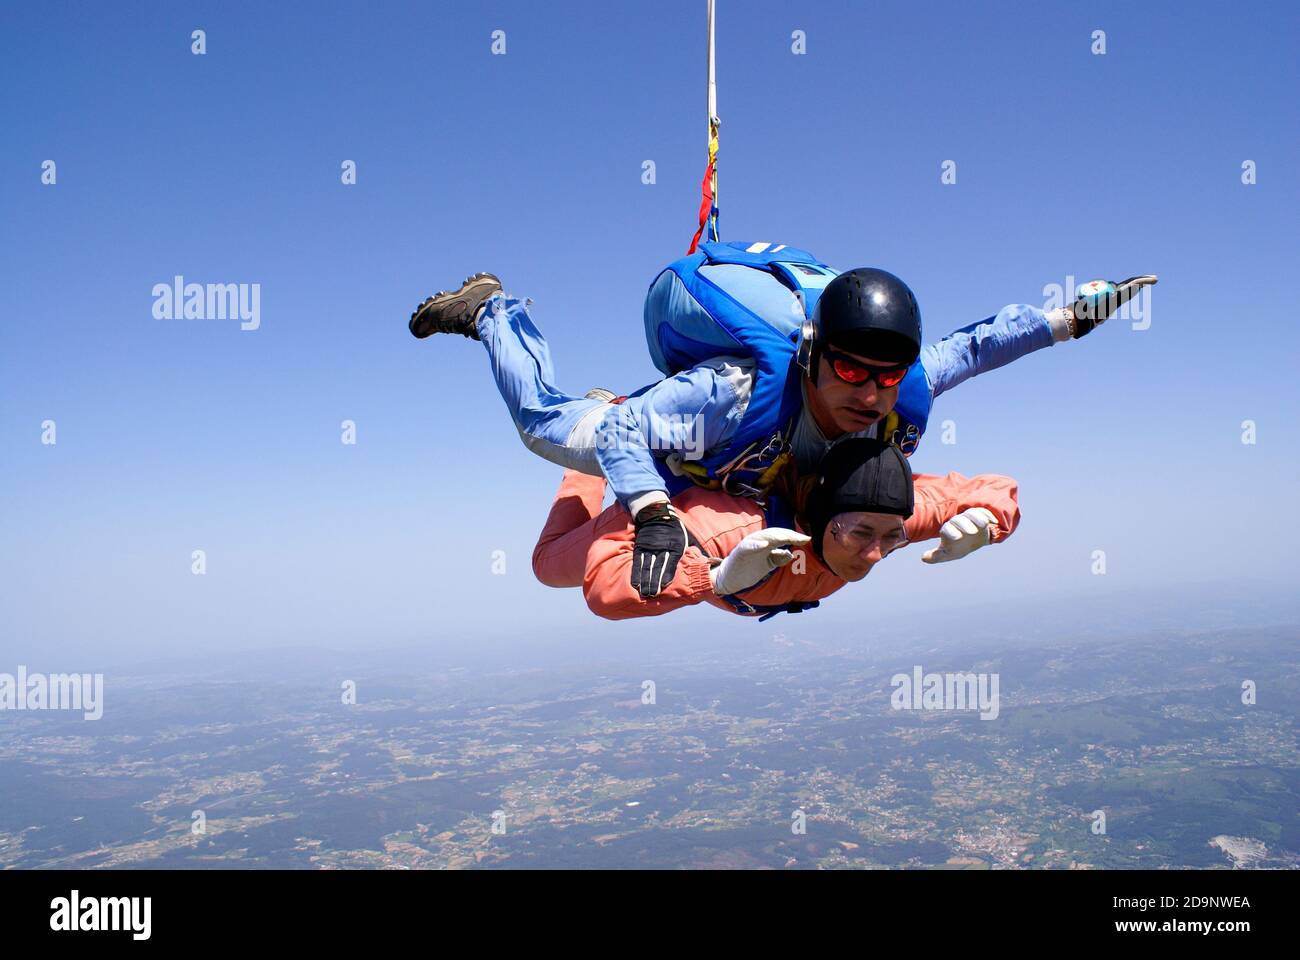 Skydive tandem jump extreme sports Stock Photo